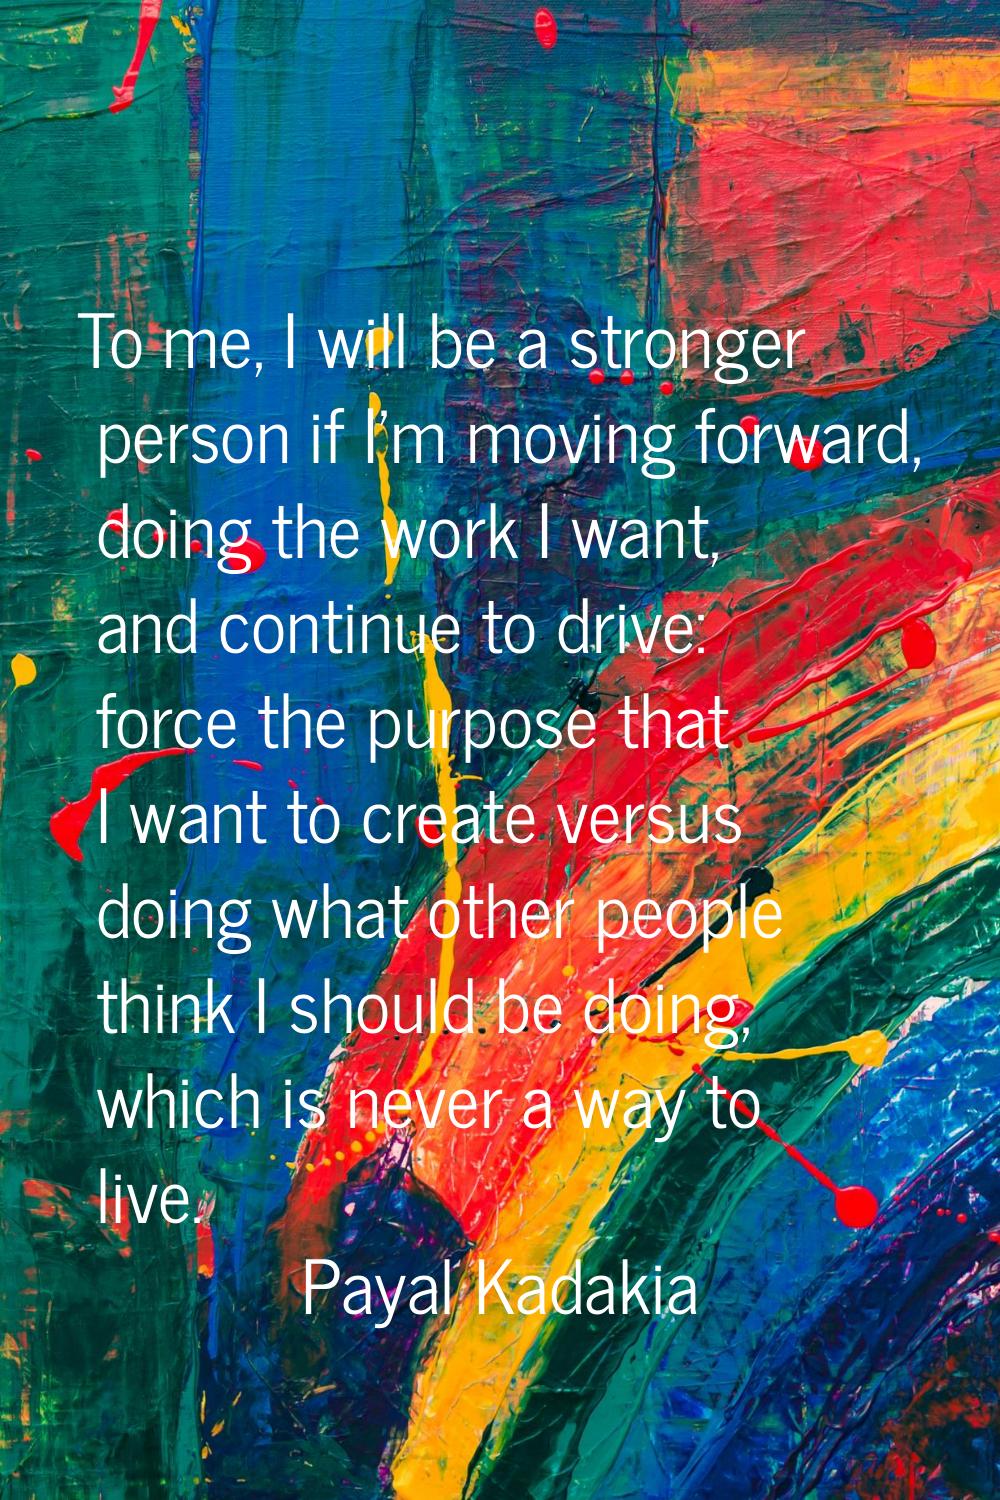 To me, I will be a stronger person if I'm moving forward, doing the work I want, and continue to dr